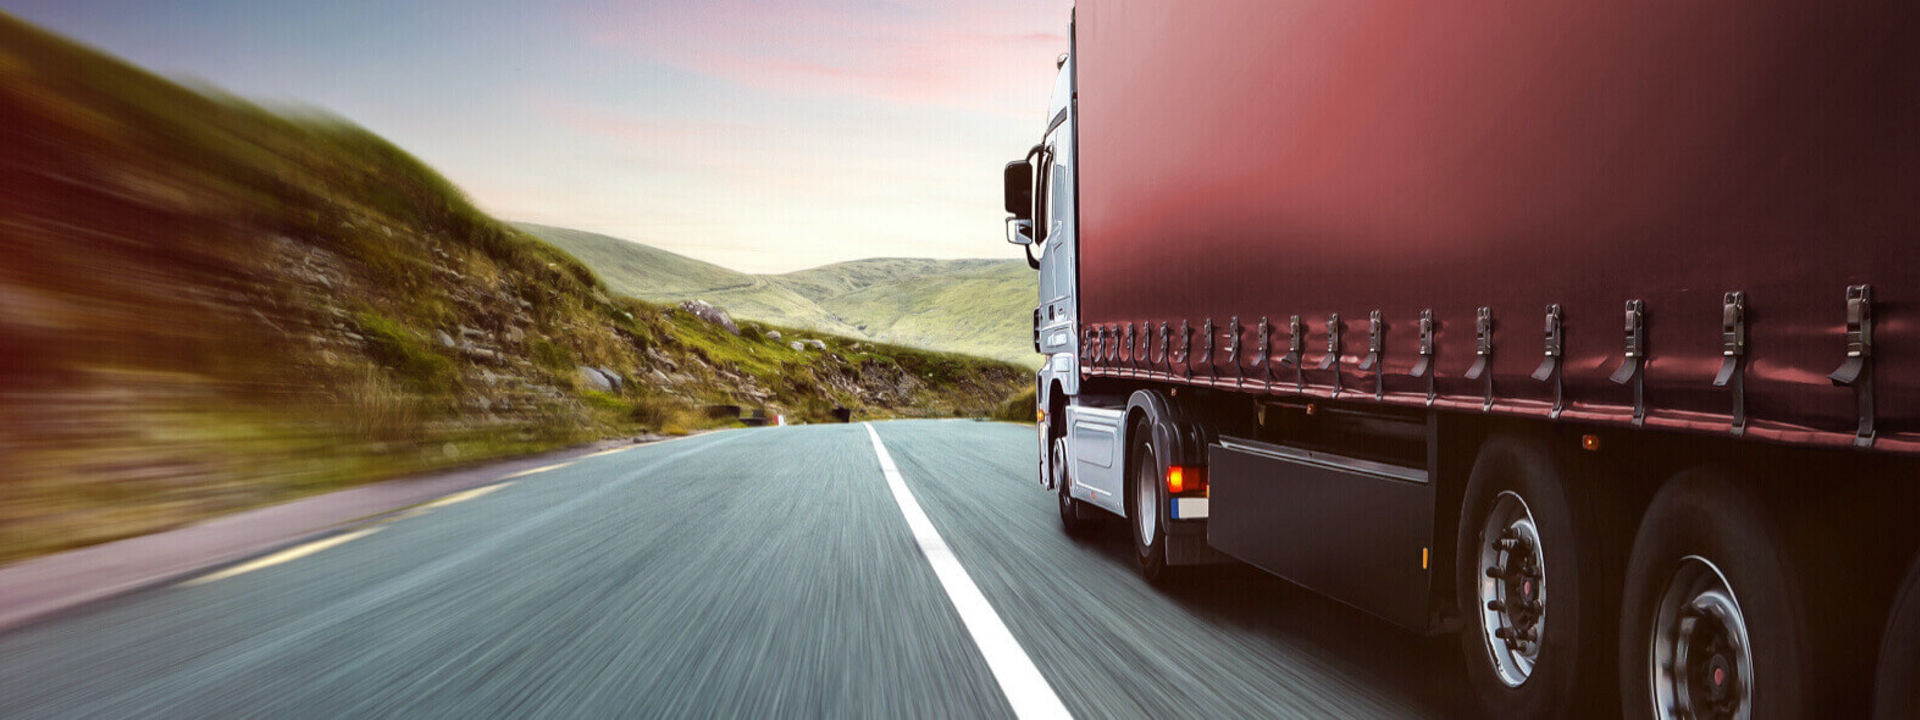 This image shows a side view of a commercial fleet driving on the road with Bridgestone truck tyres.